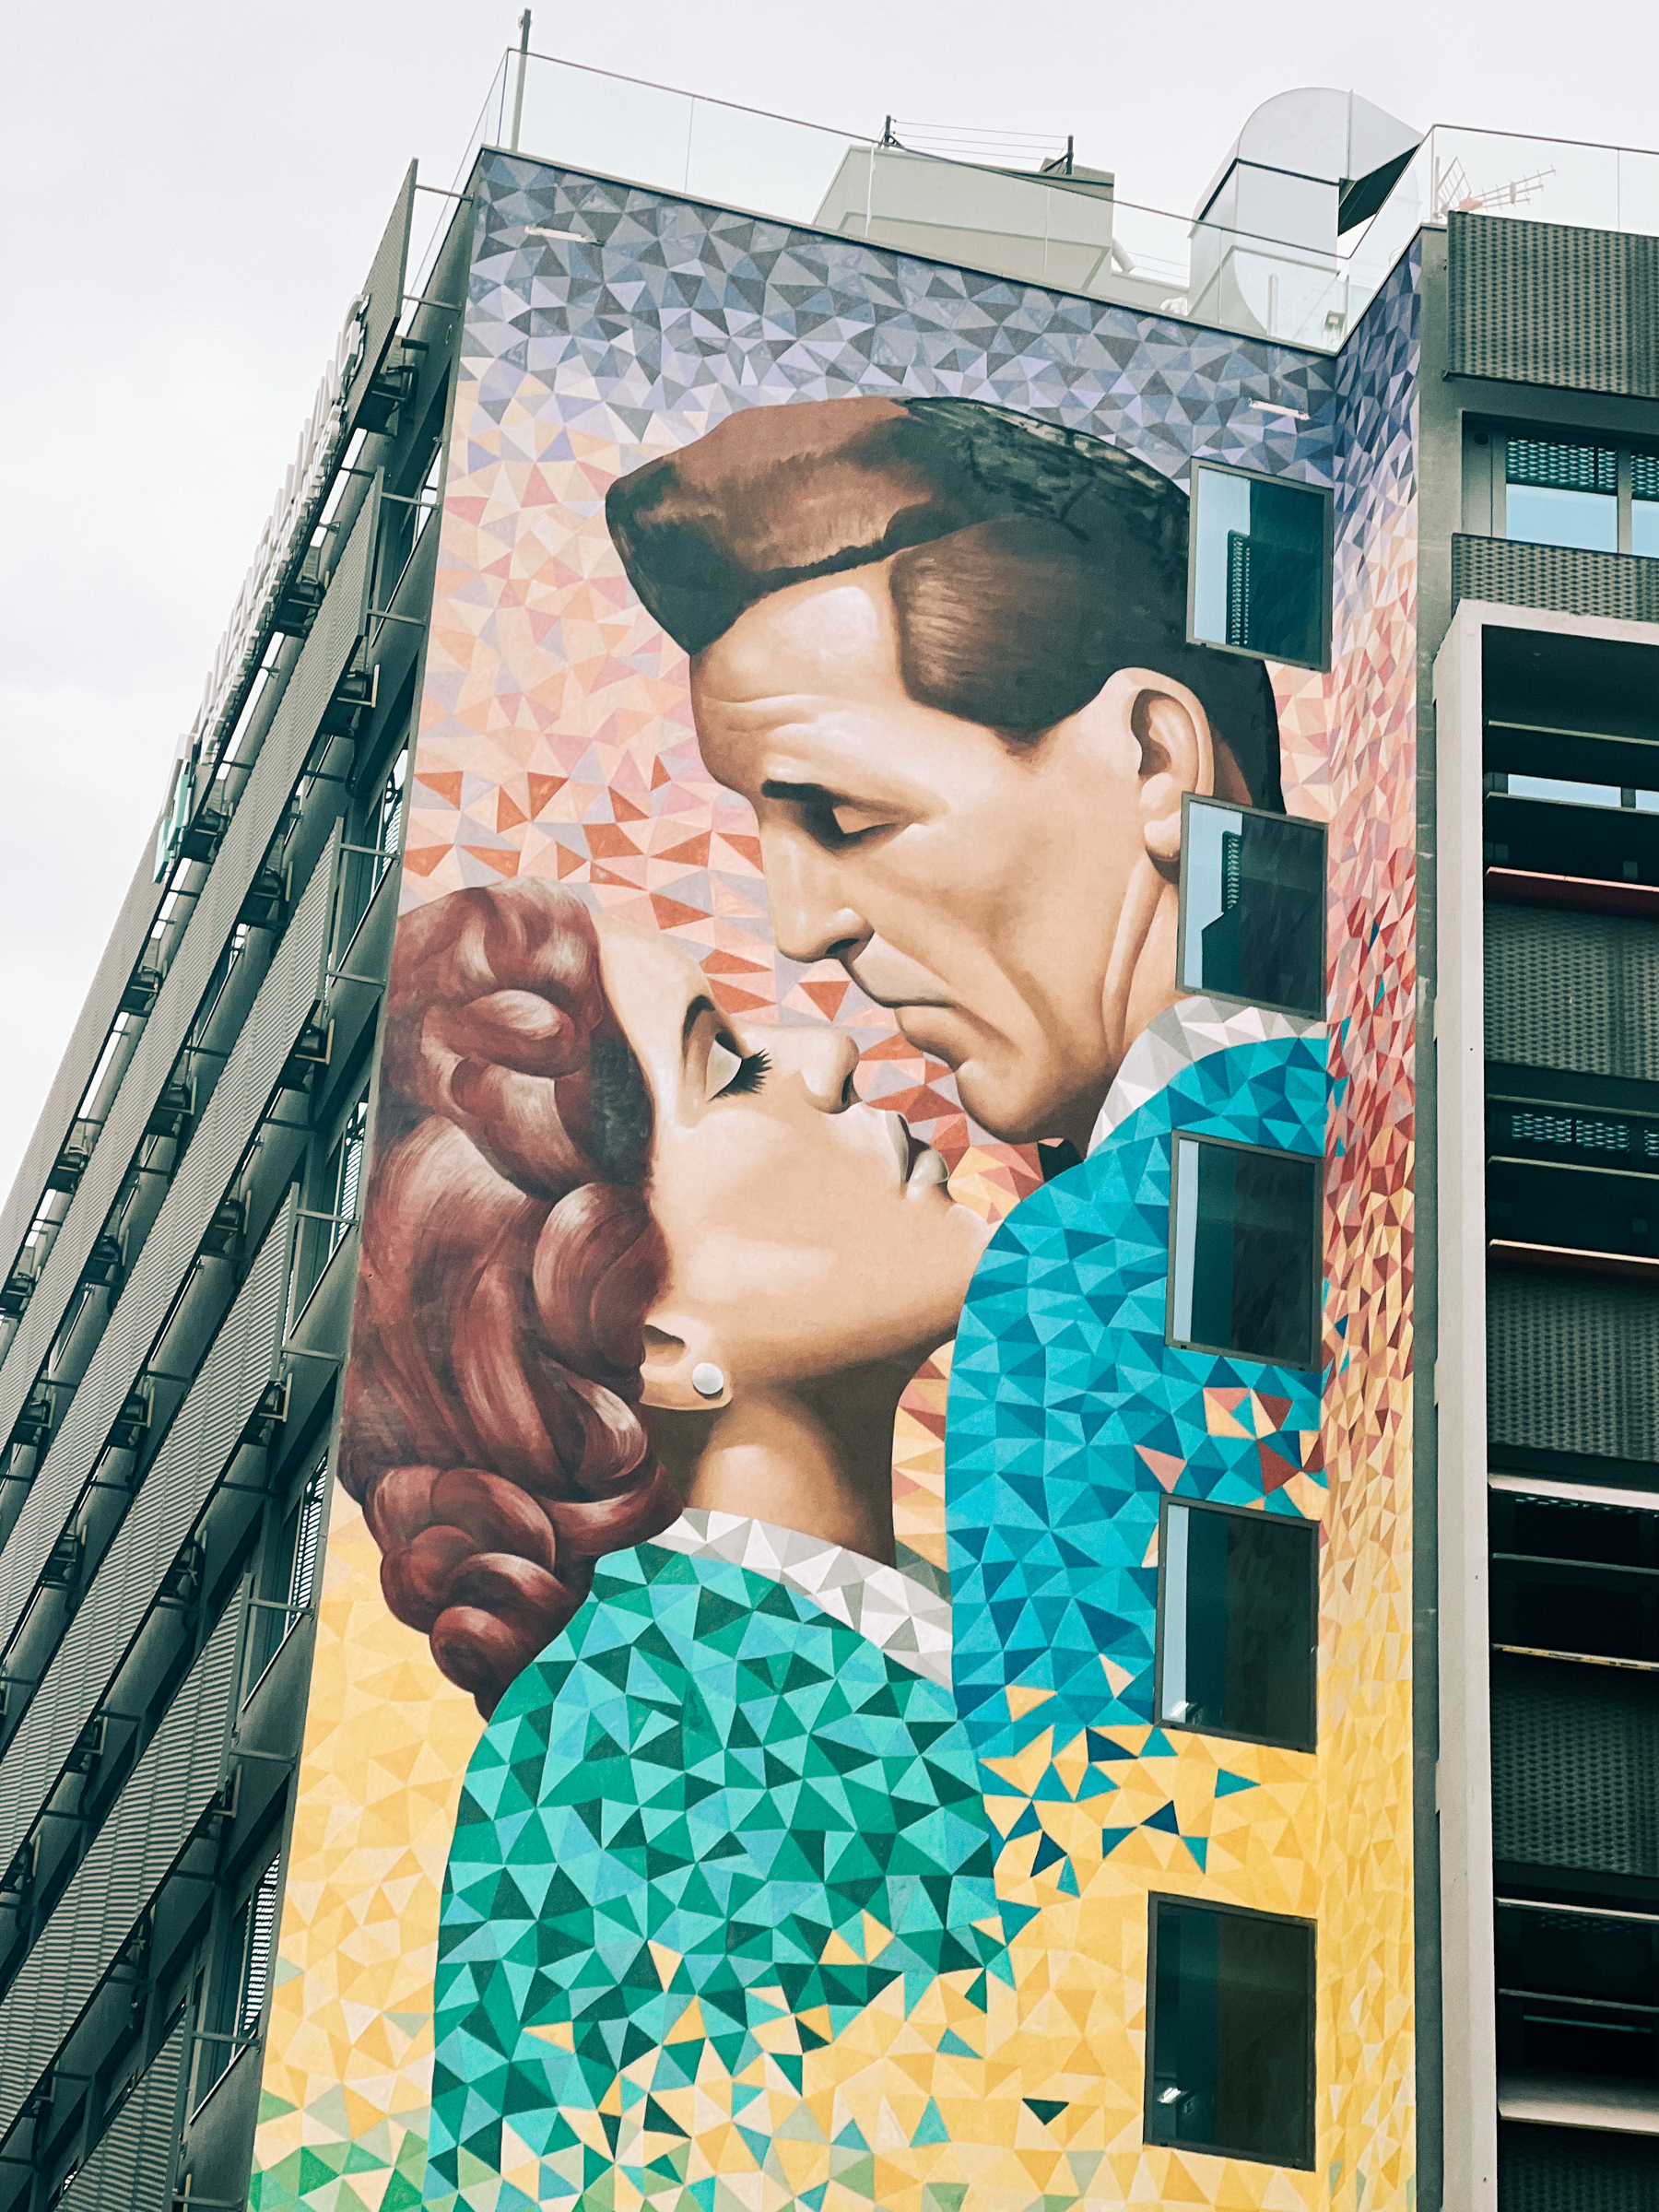 Street Art on the side of a building. A kiss.